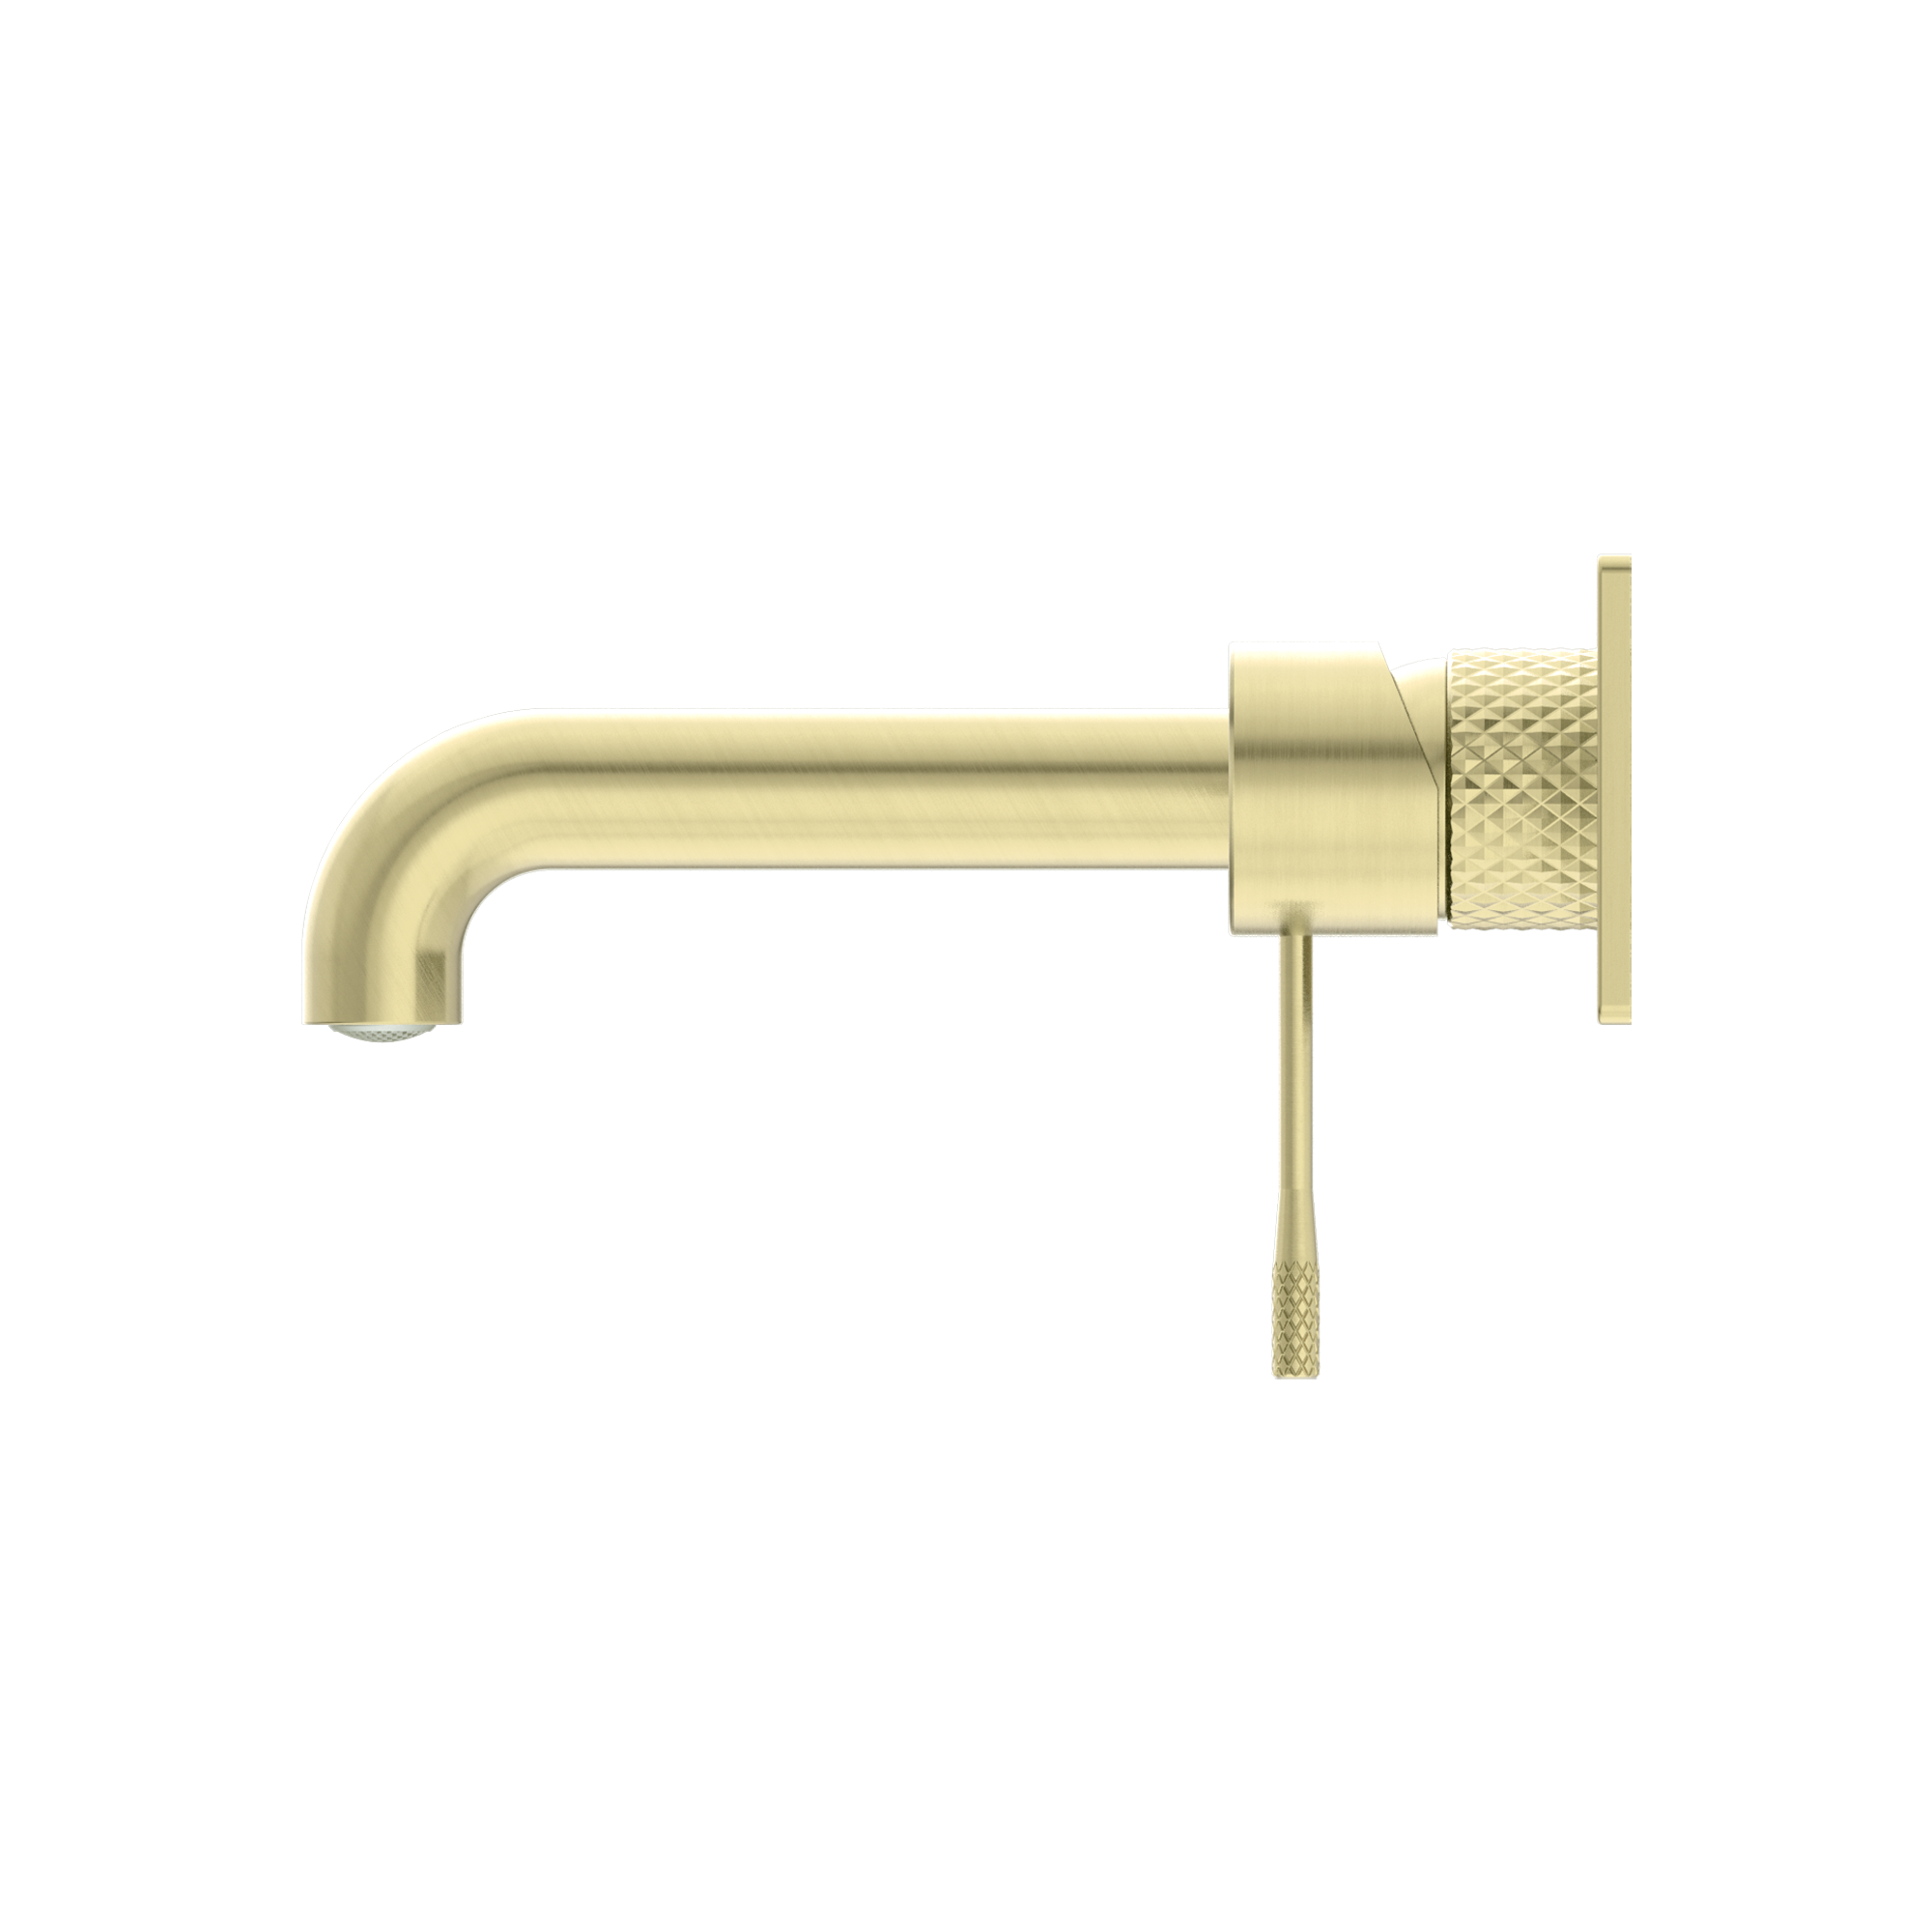 NERO OPAL WALL BASIN/ BATH MIXER BRUSHED GOLD (AVAILABLE IN 120MM, 160MM, 185MM, 230MM AND 260MM)